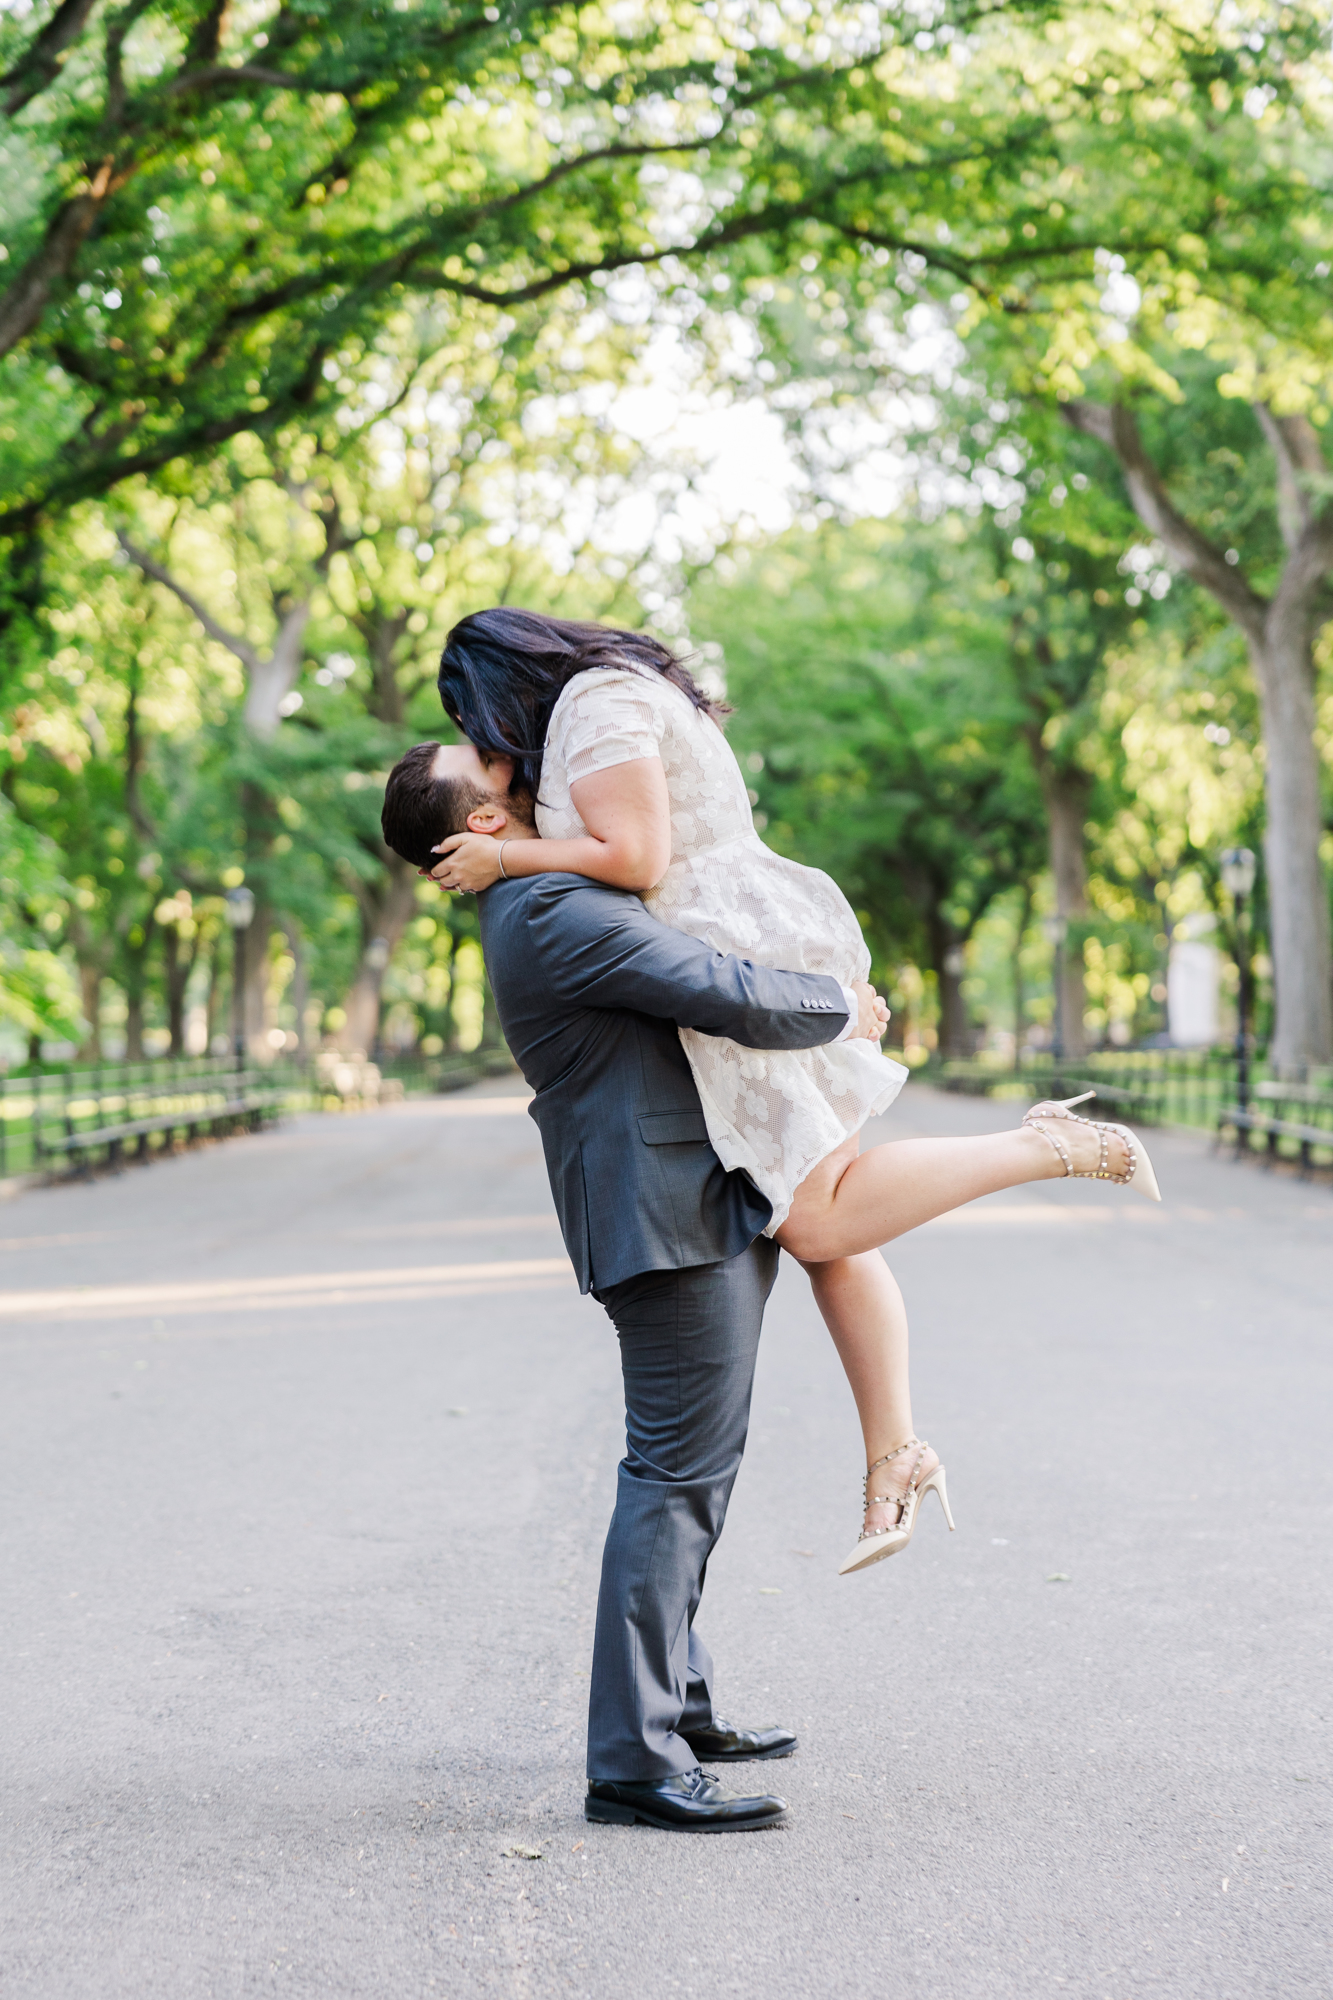 Special Engagement Photos with Landmarks, New York